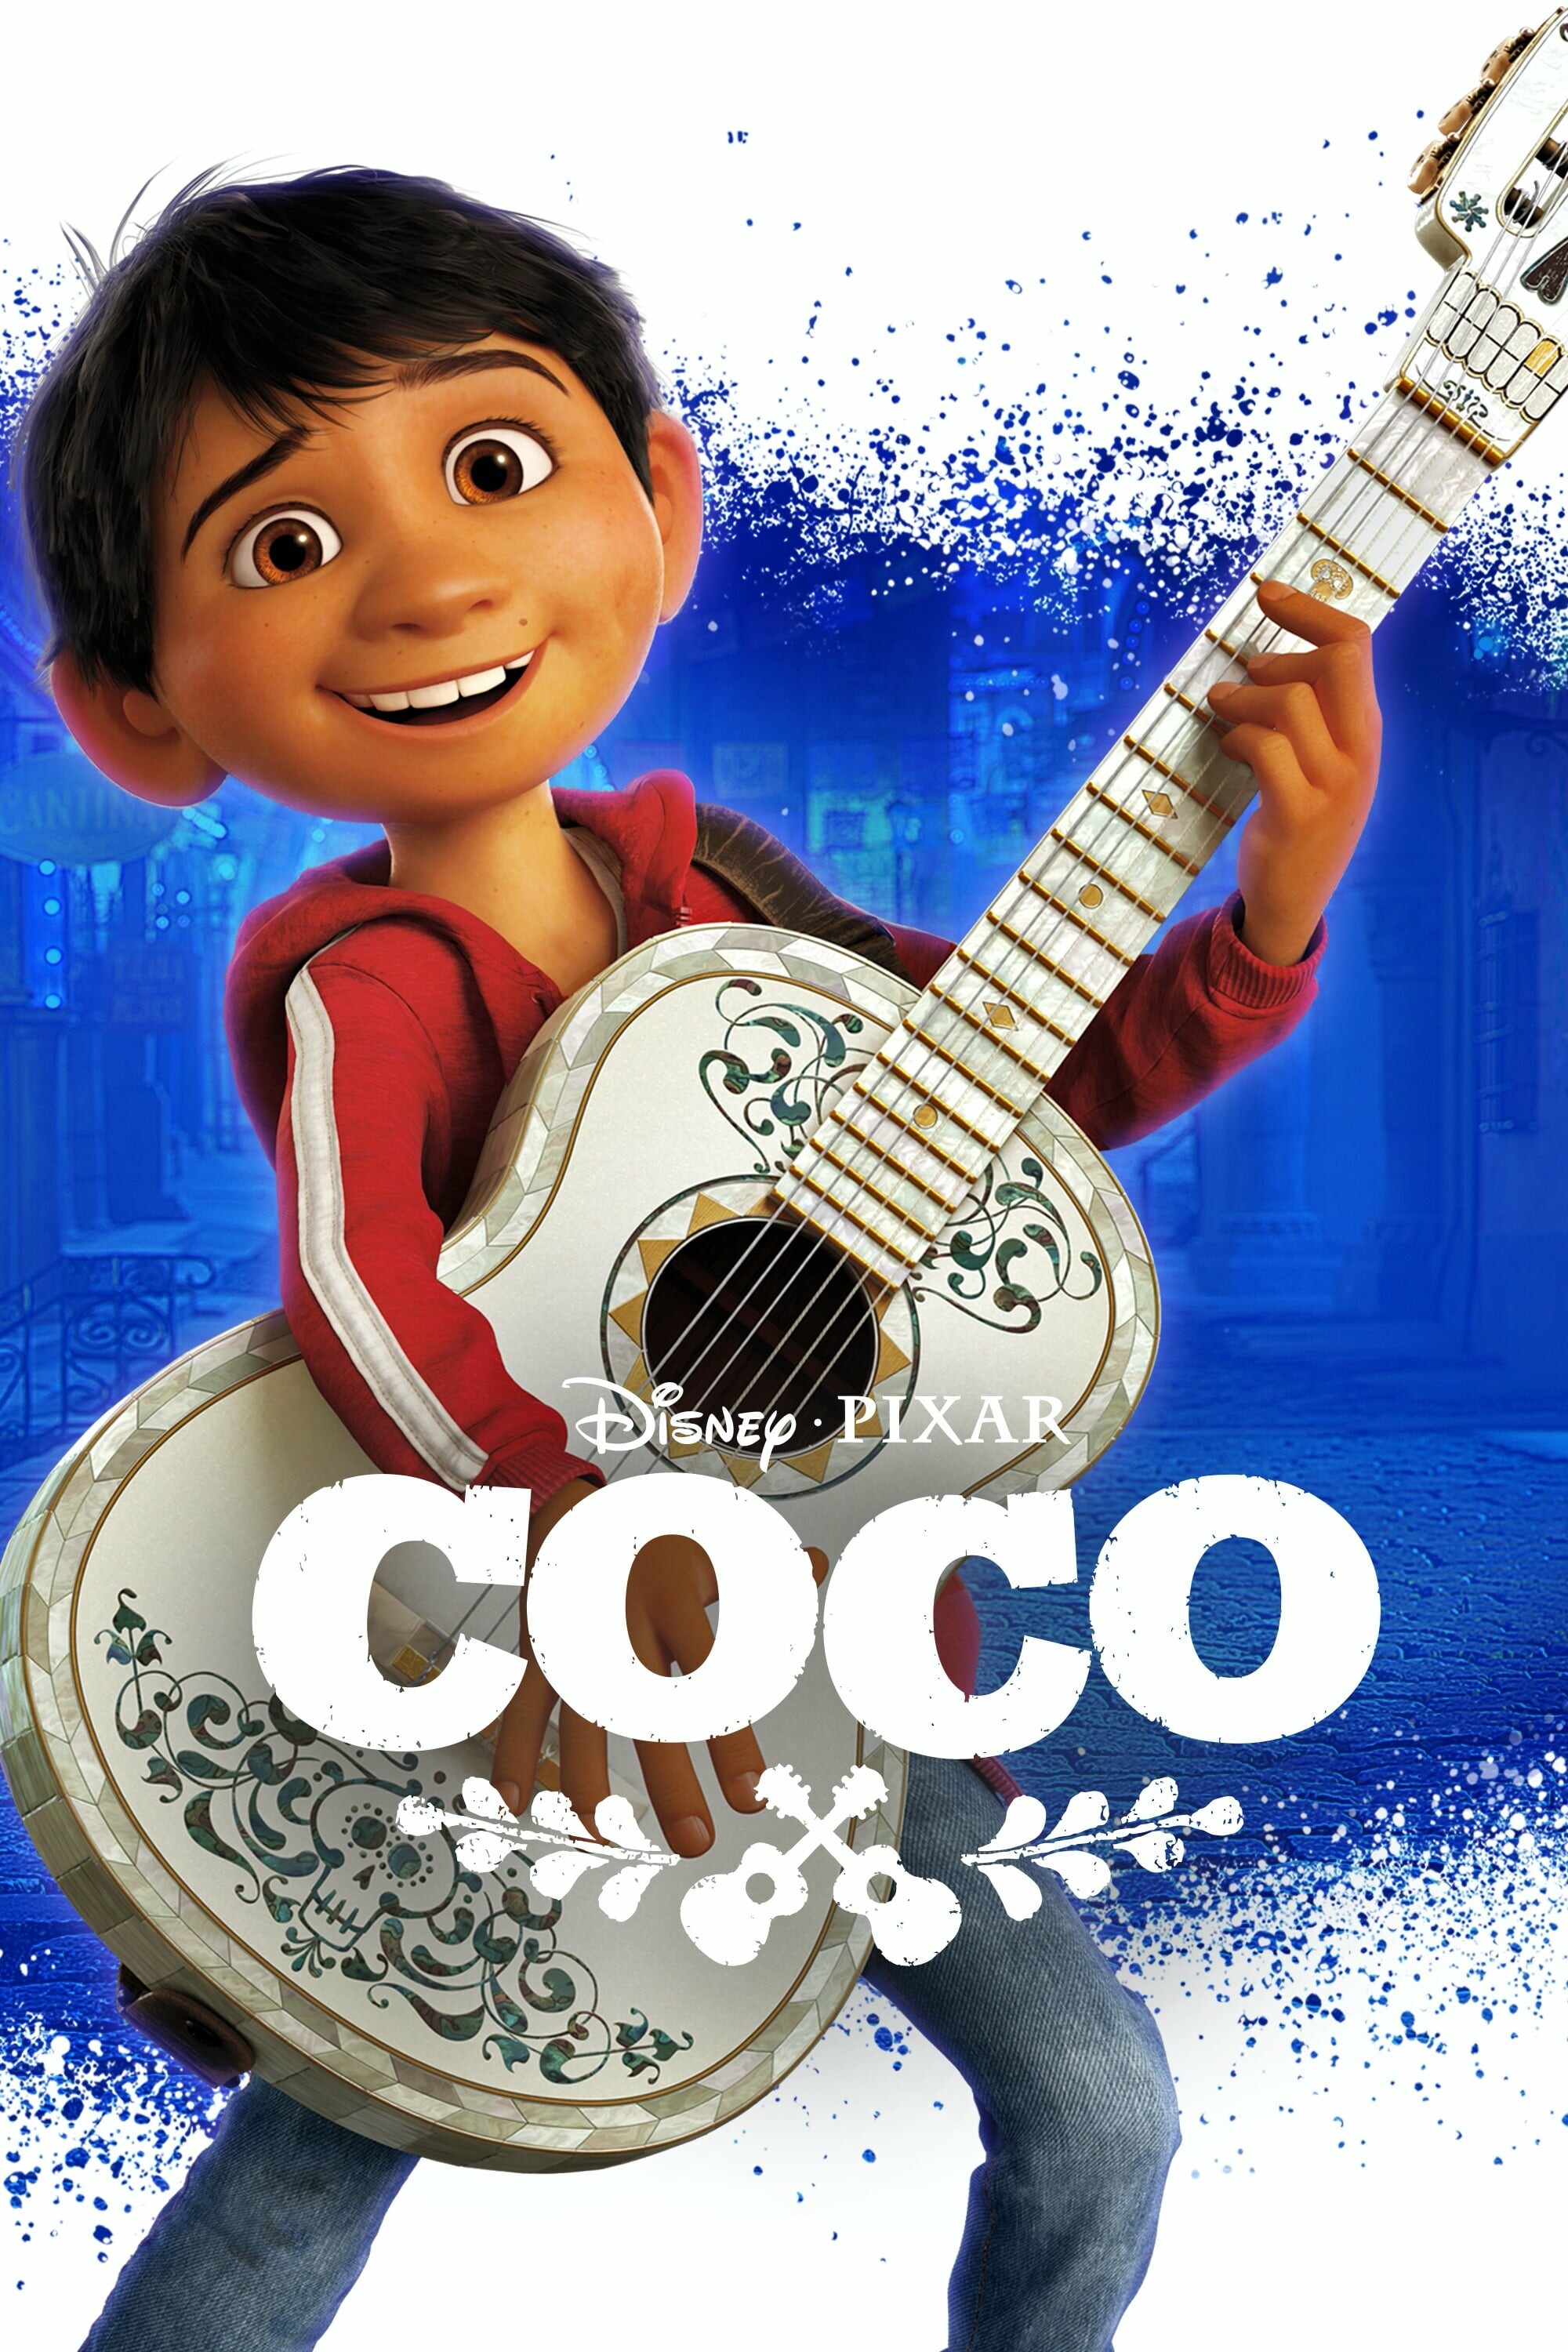 Coco (Cartoon): The story follows a 12-year-old boy named Miguel who is accidentally transported to the Land of the Dead, where he seeks the help of his deceased musician great-great-grandfather to return him to his family among the living. 2000x3000 HD Background.